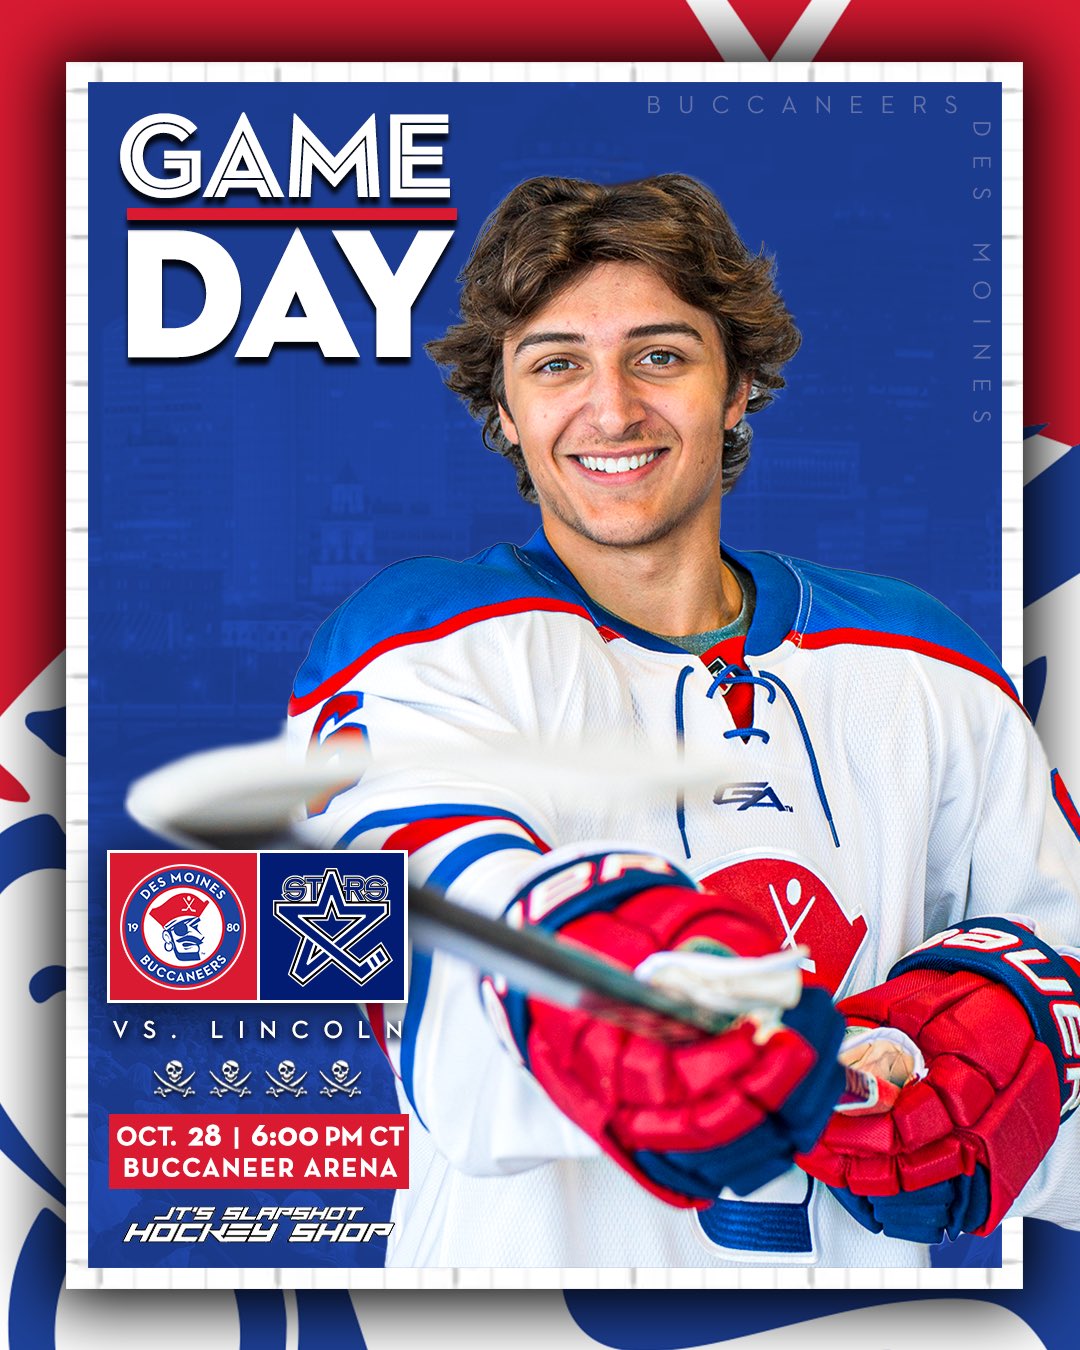 Des Moines Buccaneers (@bucshockey) • Instagram photos and videos